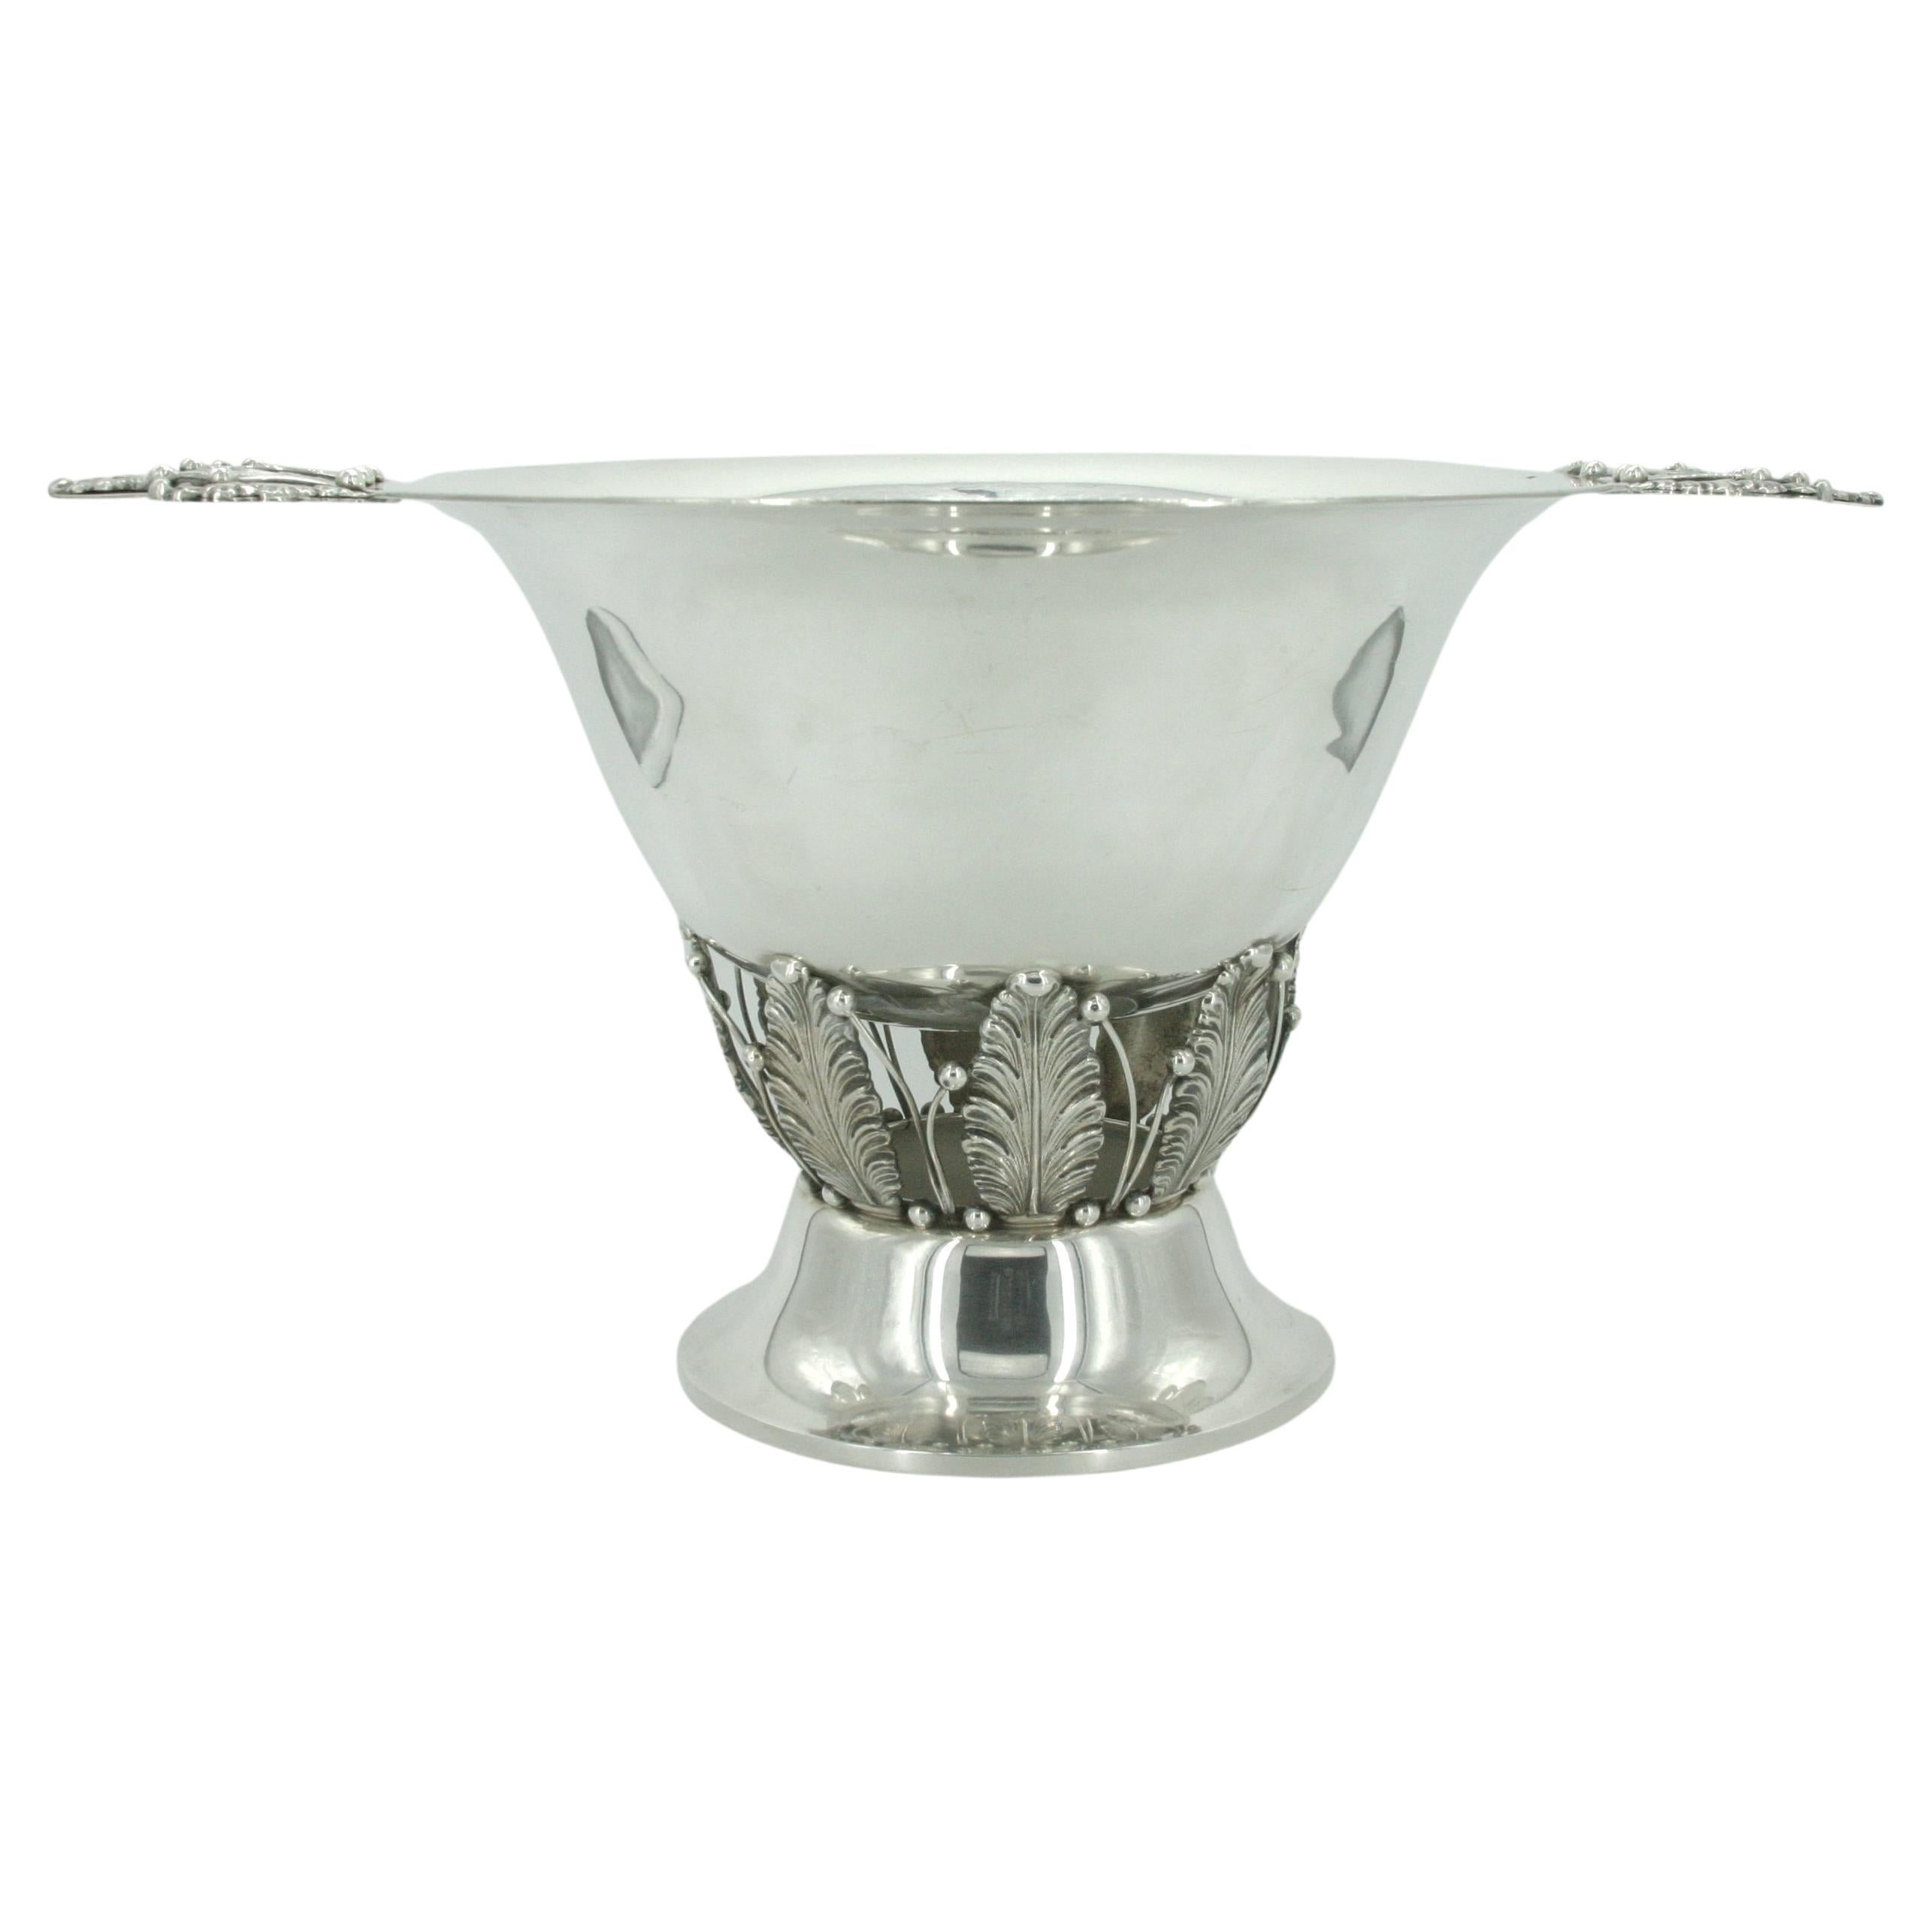 Large Sterling Silver Handled Punch Bowl